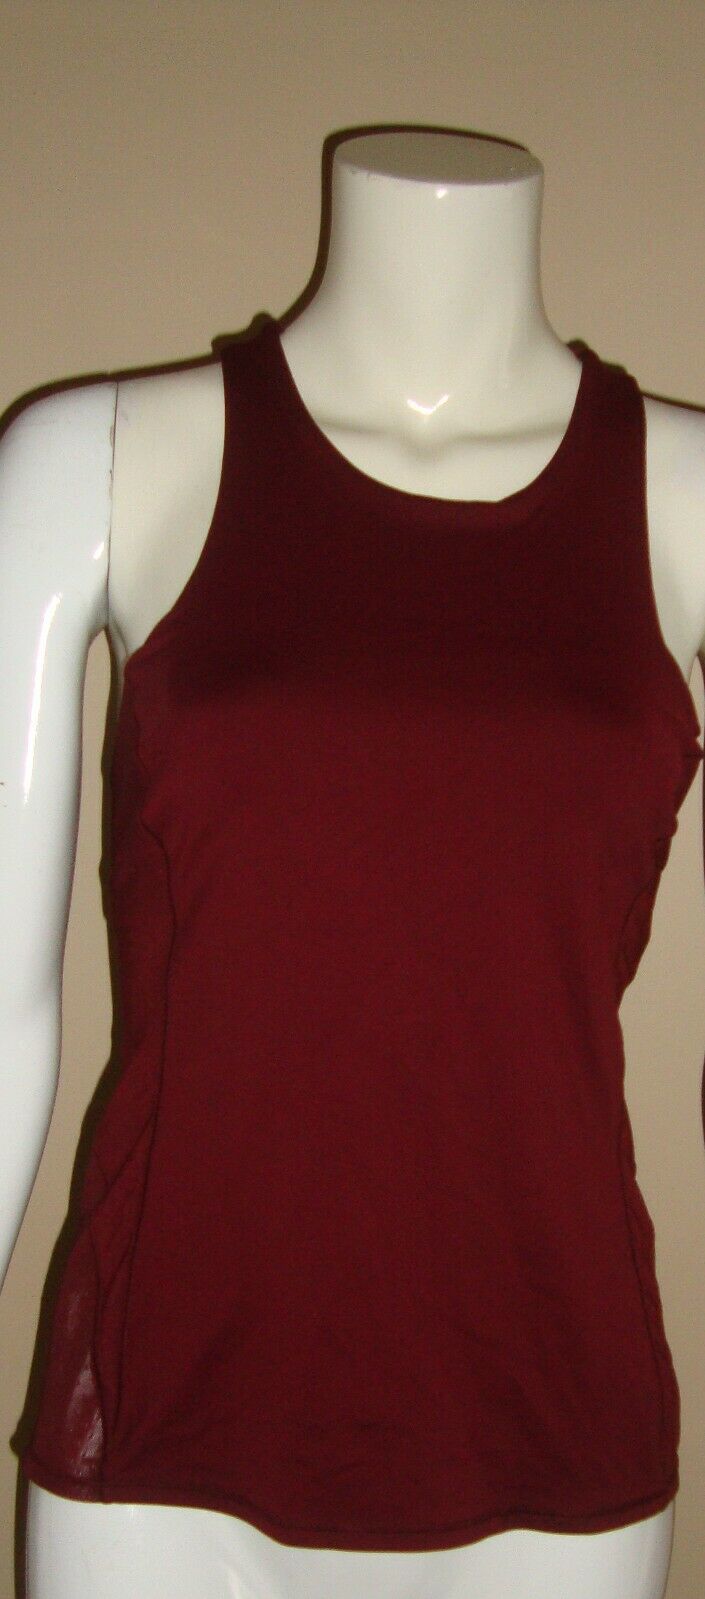 Primary image for Lululemon Burgundy Tank Top With Built it Bra Mesh Detail at the back Size 4